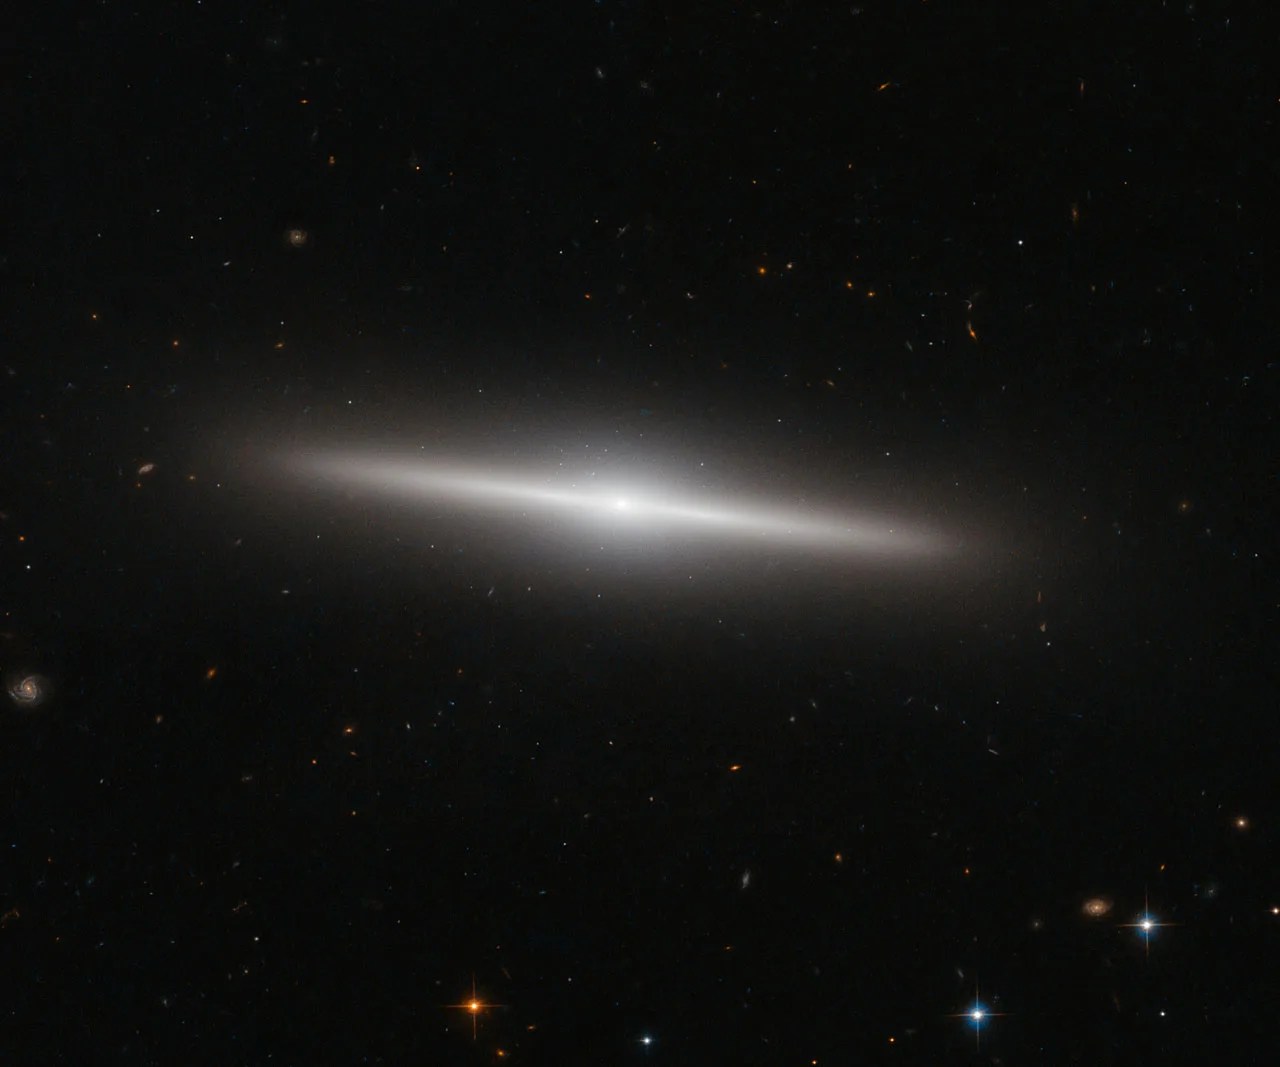 A delicate side-on galaxy in a field of black. The core is visible as a brighter spot in the center and the galaxy itself is tilted so it appears almost as a thin white glowing line.